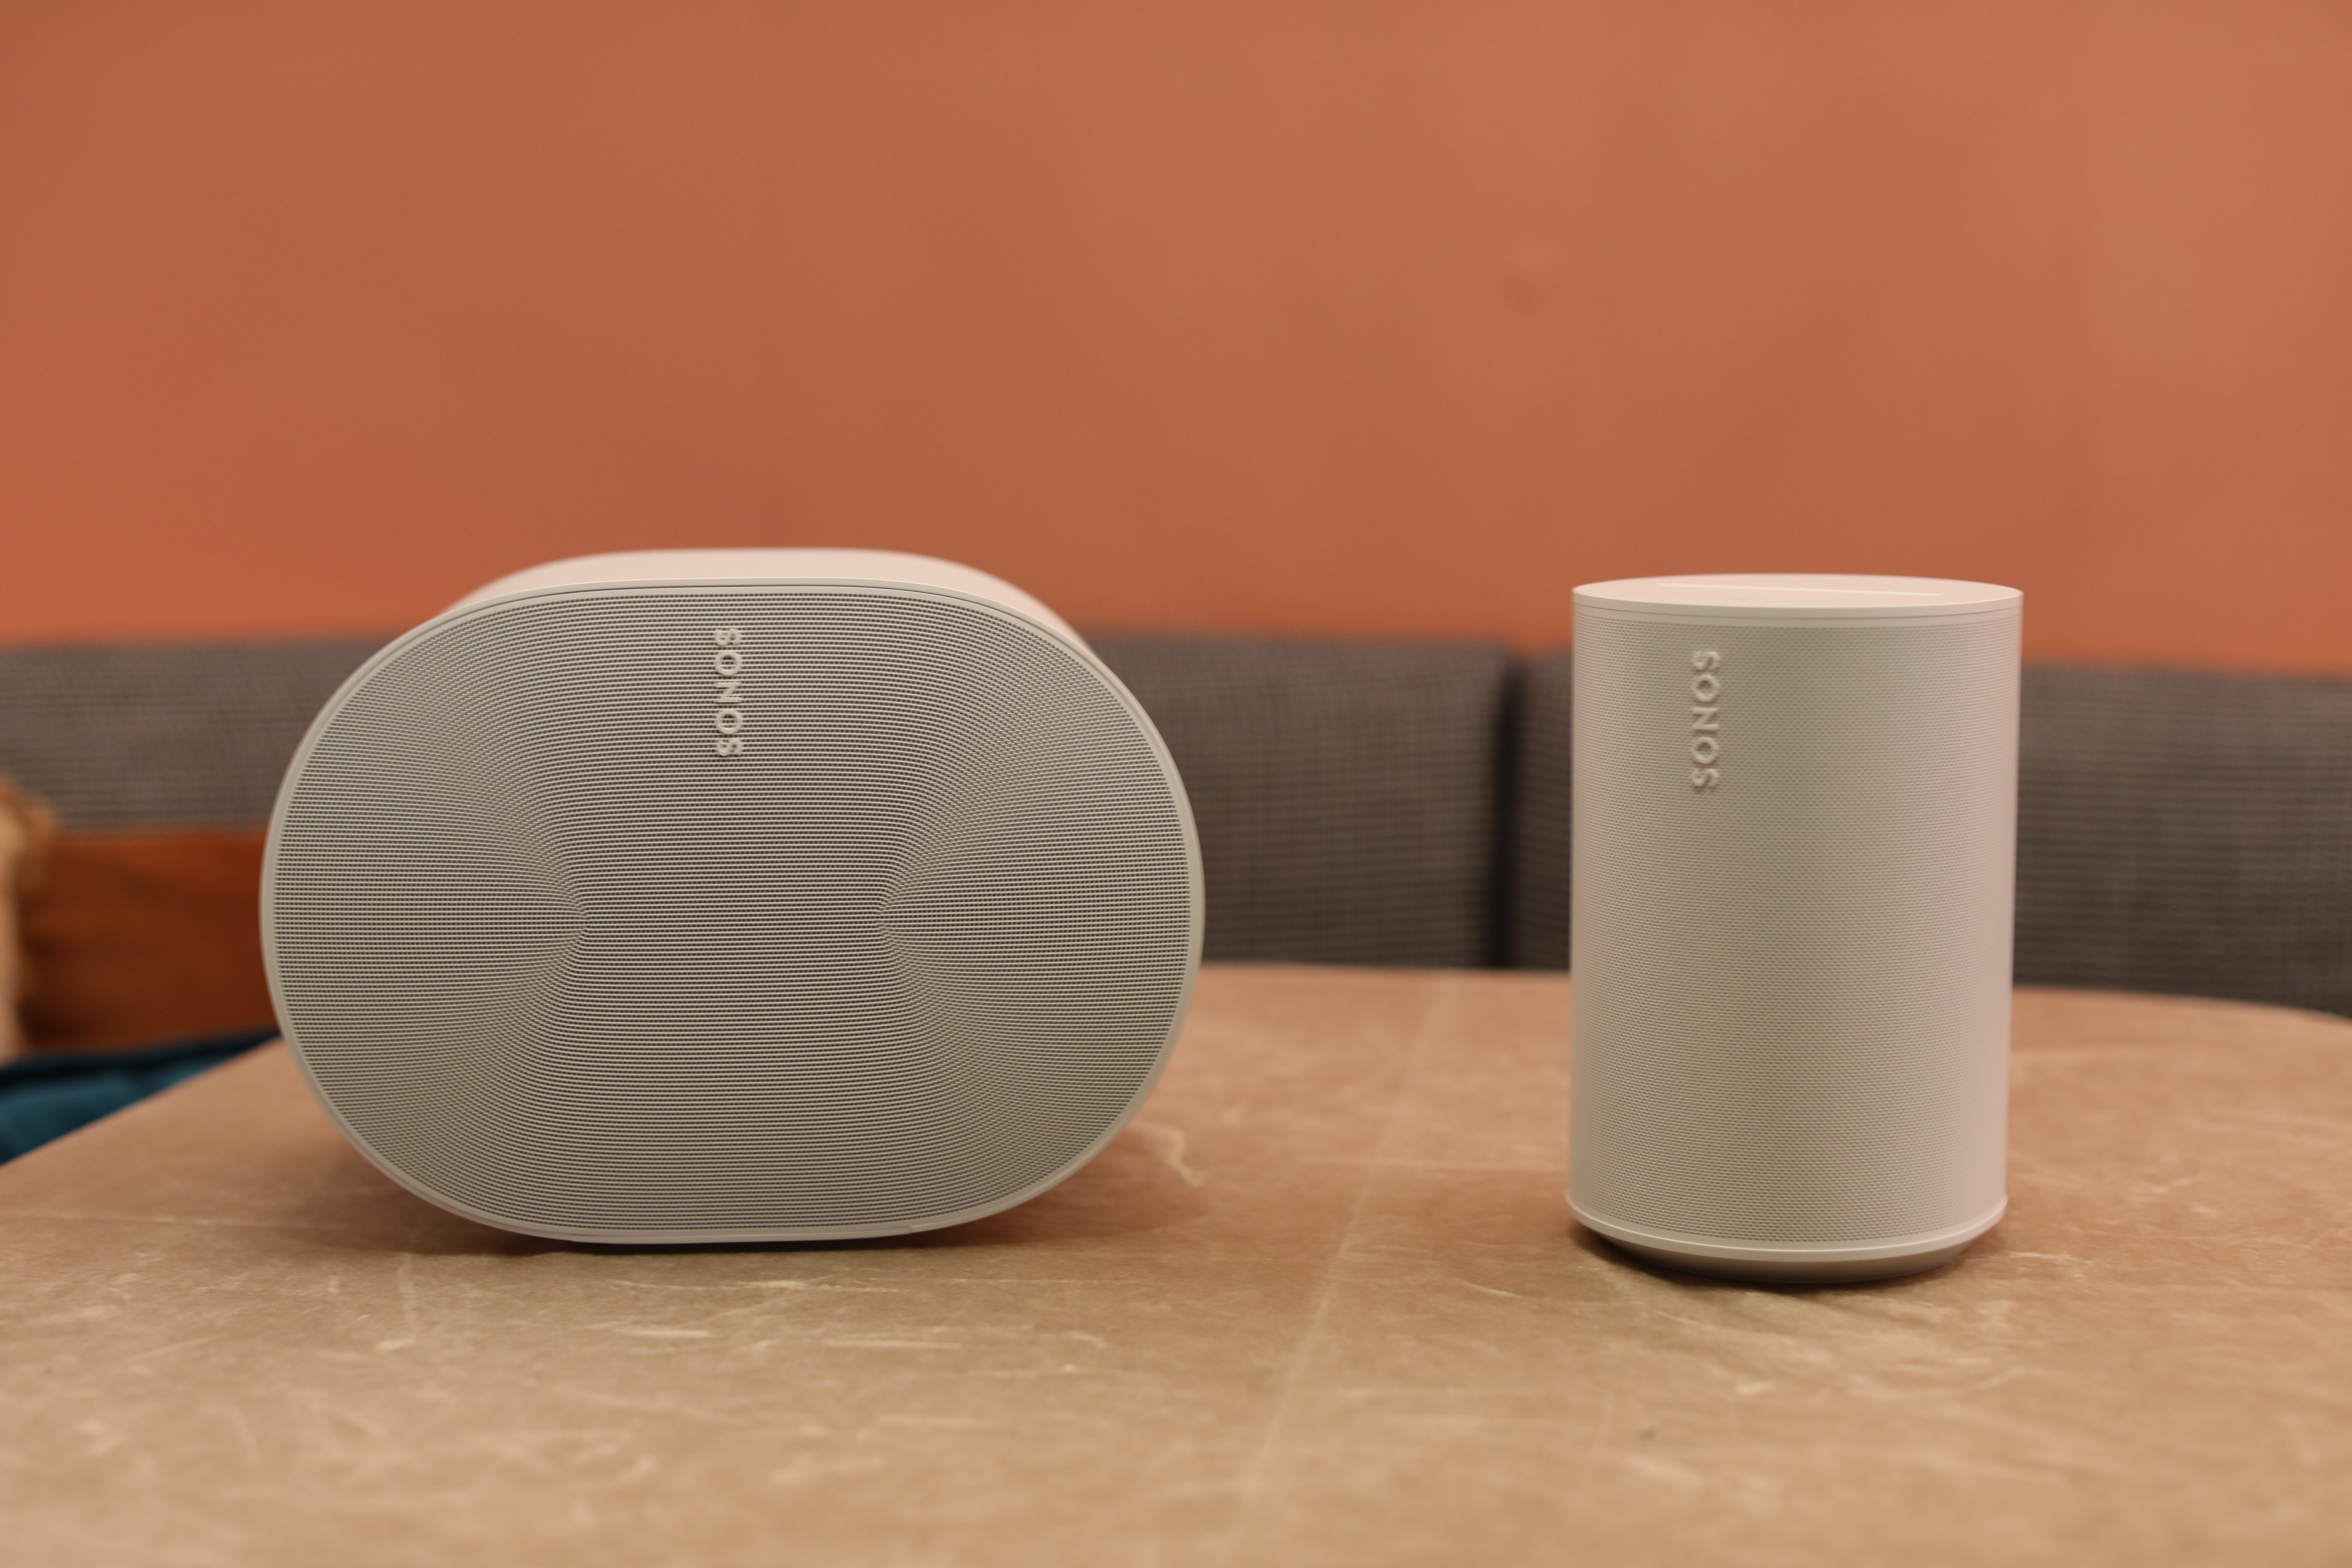 replaces One, adds a spatial audio lineup | TechCrunch